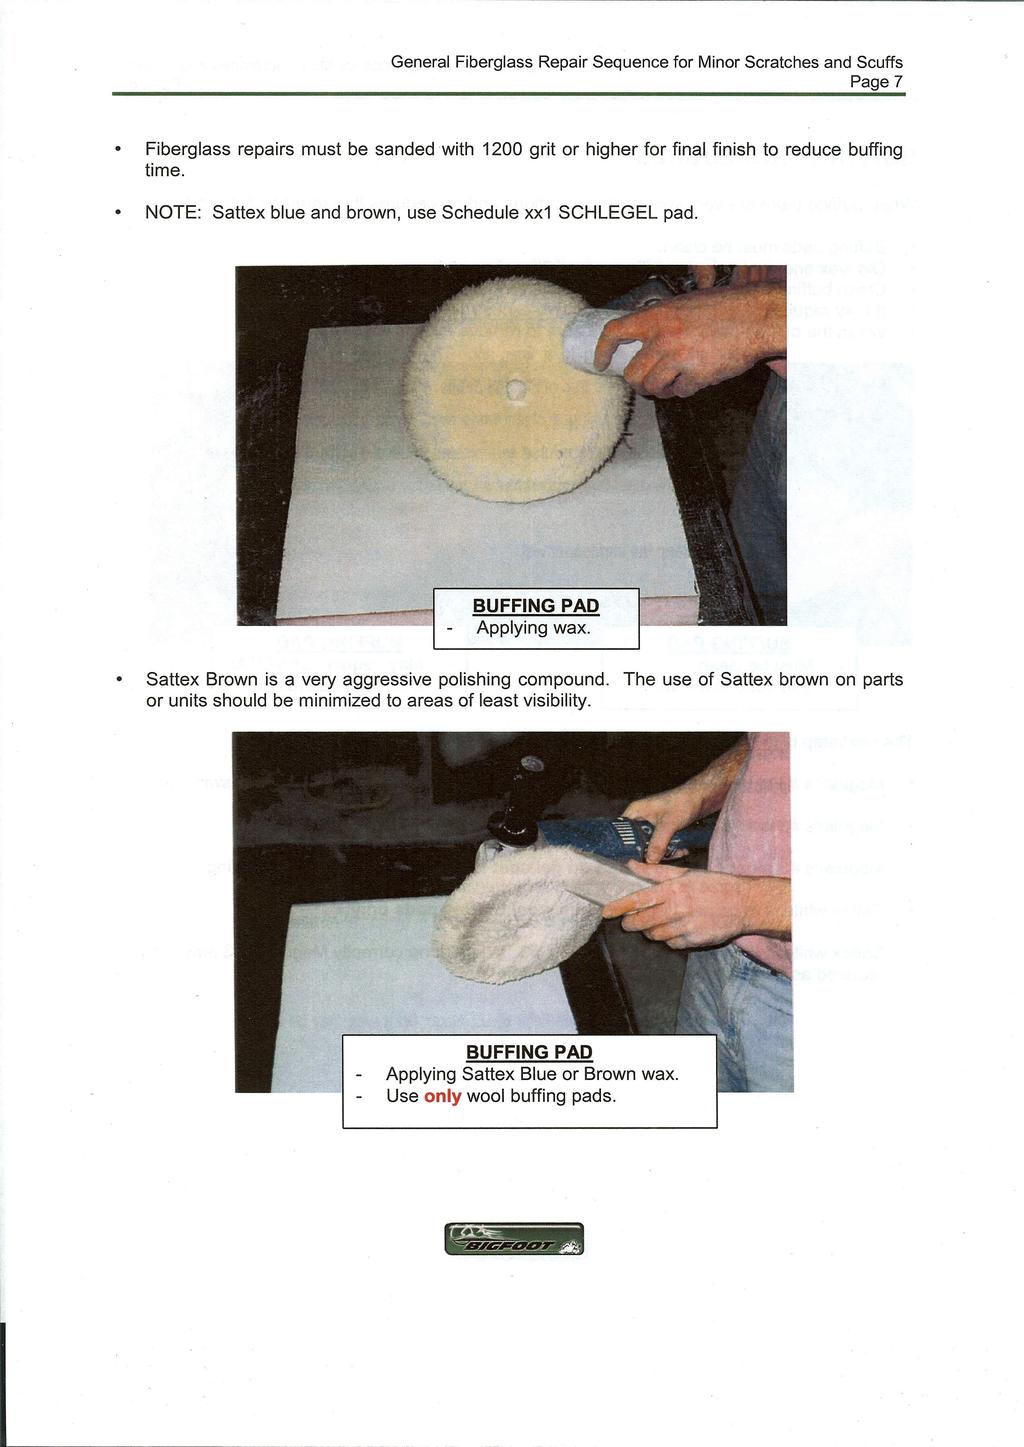 General Fiberglass Repair Sequence for Minor Scratches and Scuffs Page 7 Fiberglass repairs must be sanded with 1200 grit or higher for final finish to reduce buffing time.